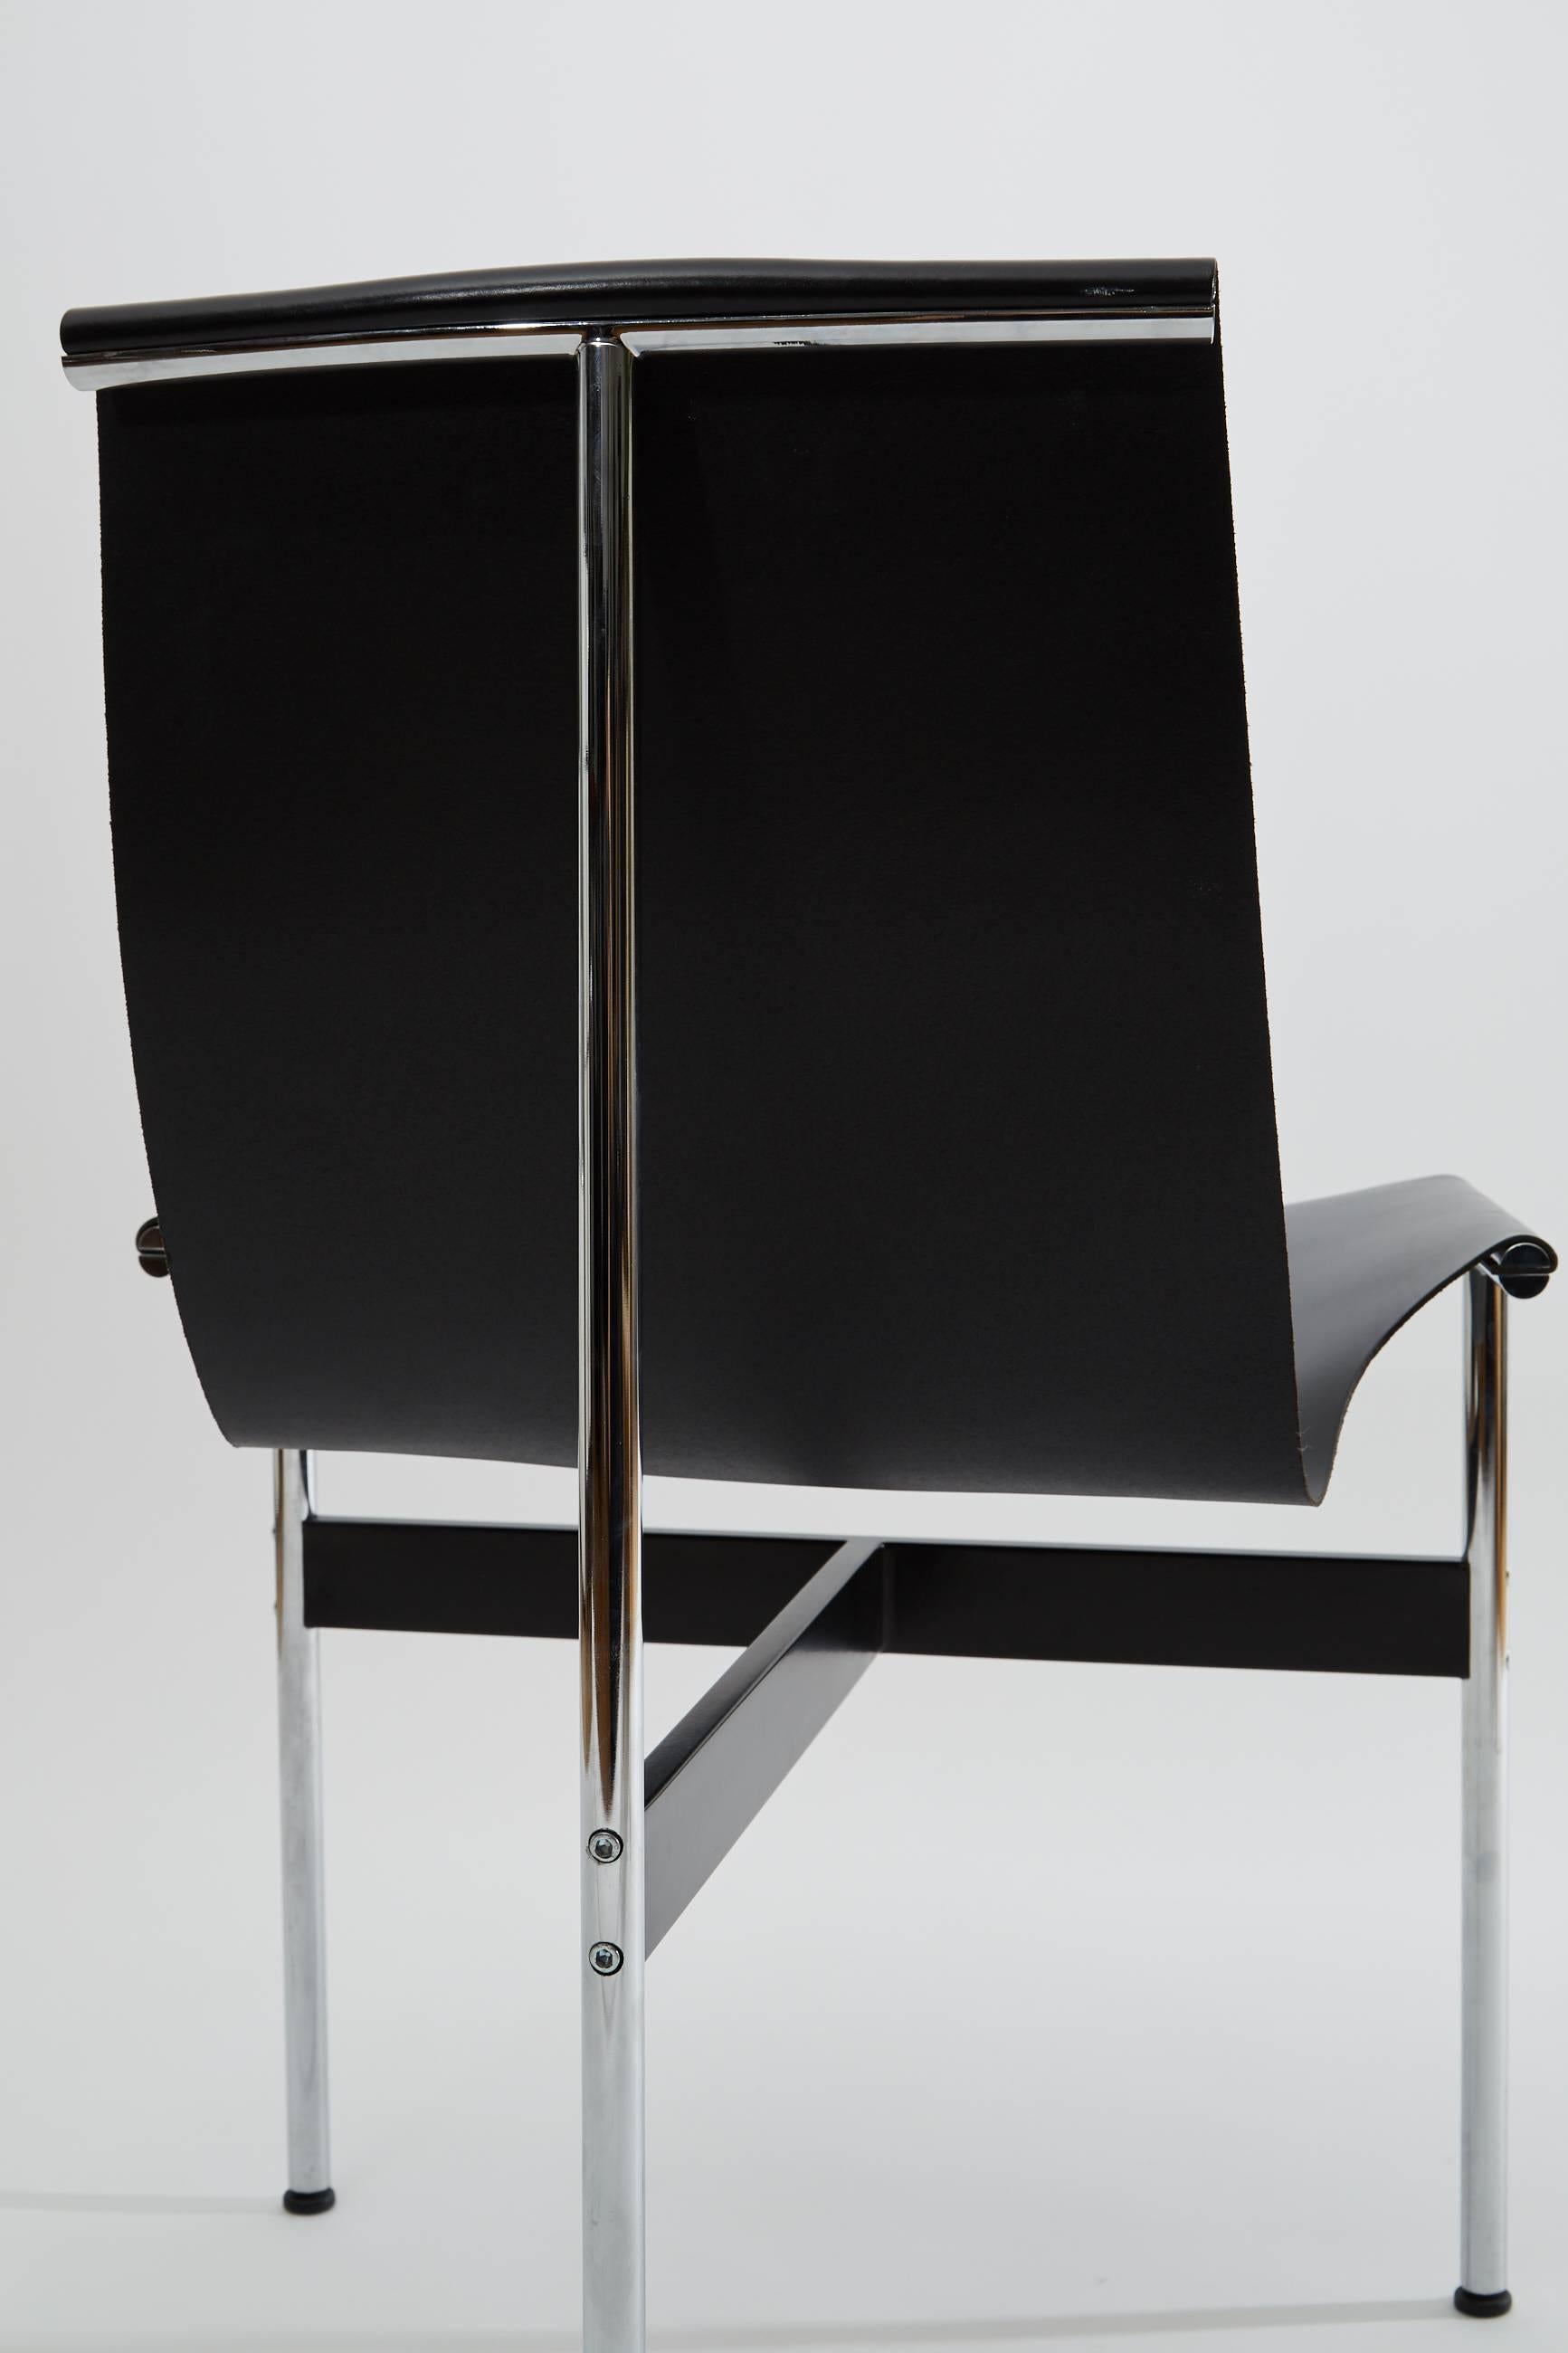 Katavolos Littell Kelley New York T-Chair Chrome Tripod and Black Leather, 1952 For Sale 10